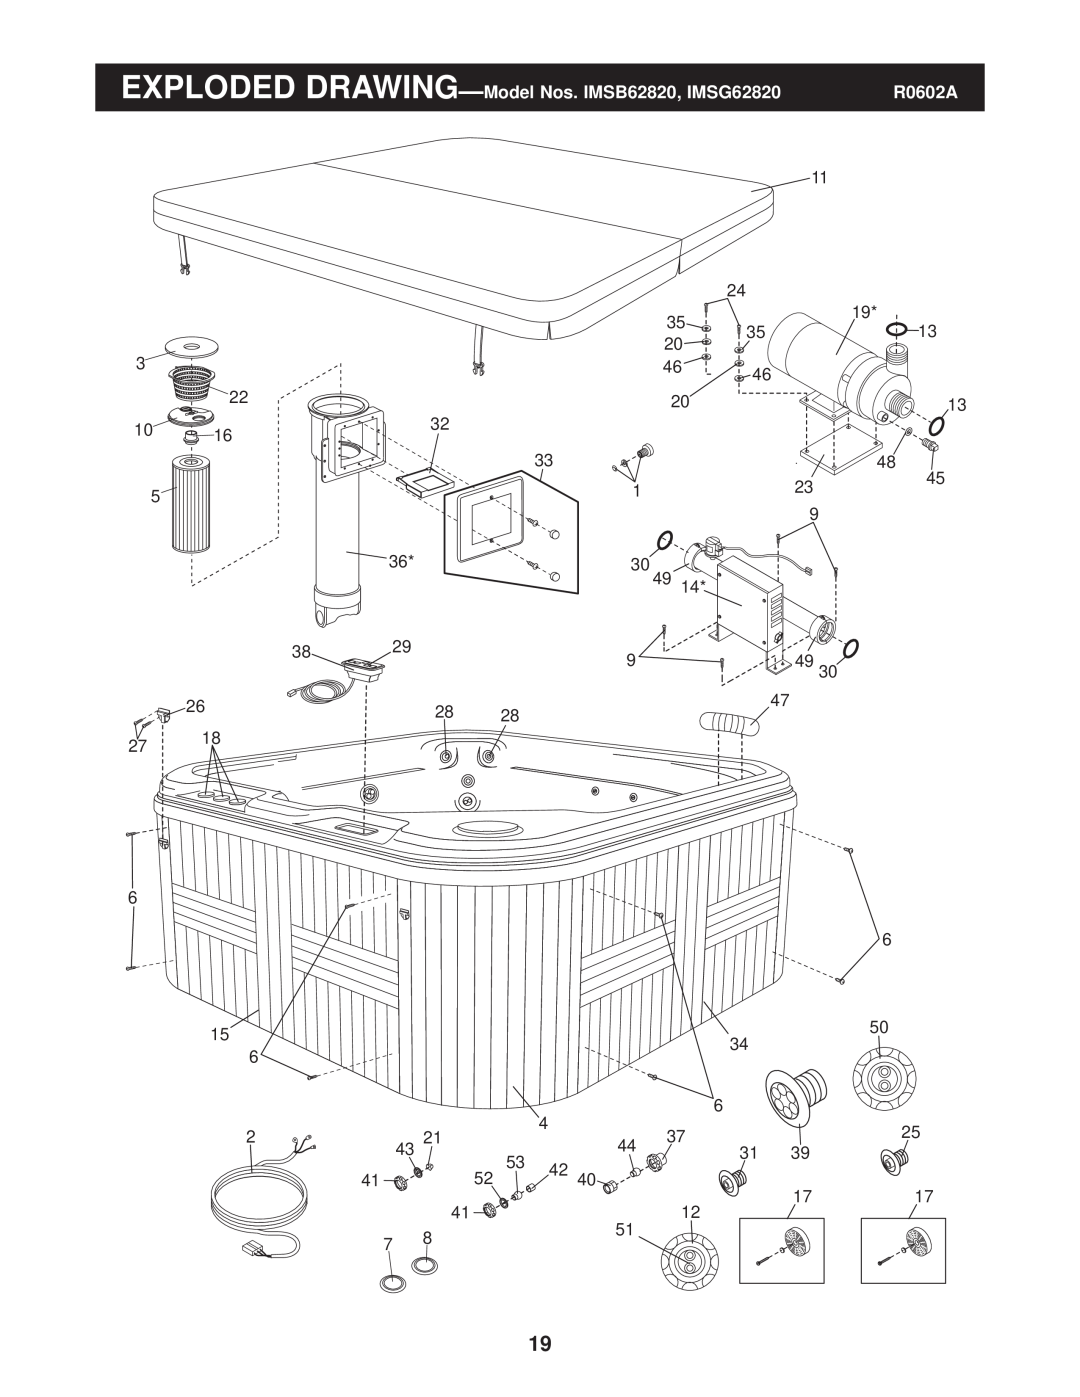 Image user manual EXPLODED DRAWING- Model Nos. IMSB62820, IMSG62820, R0602A 